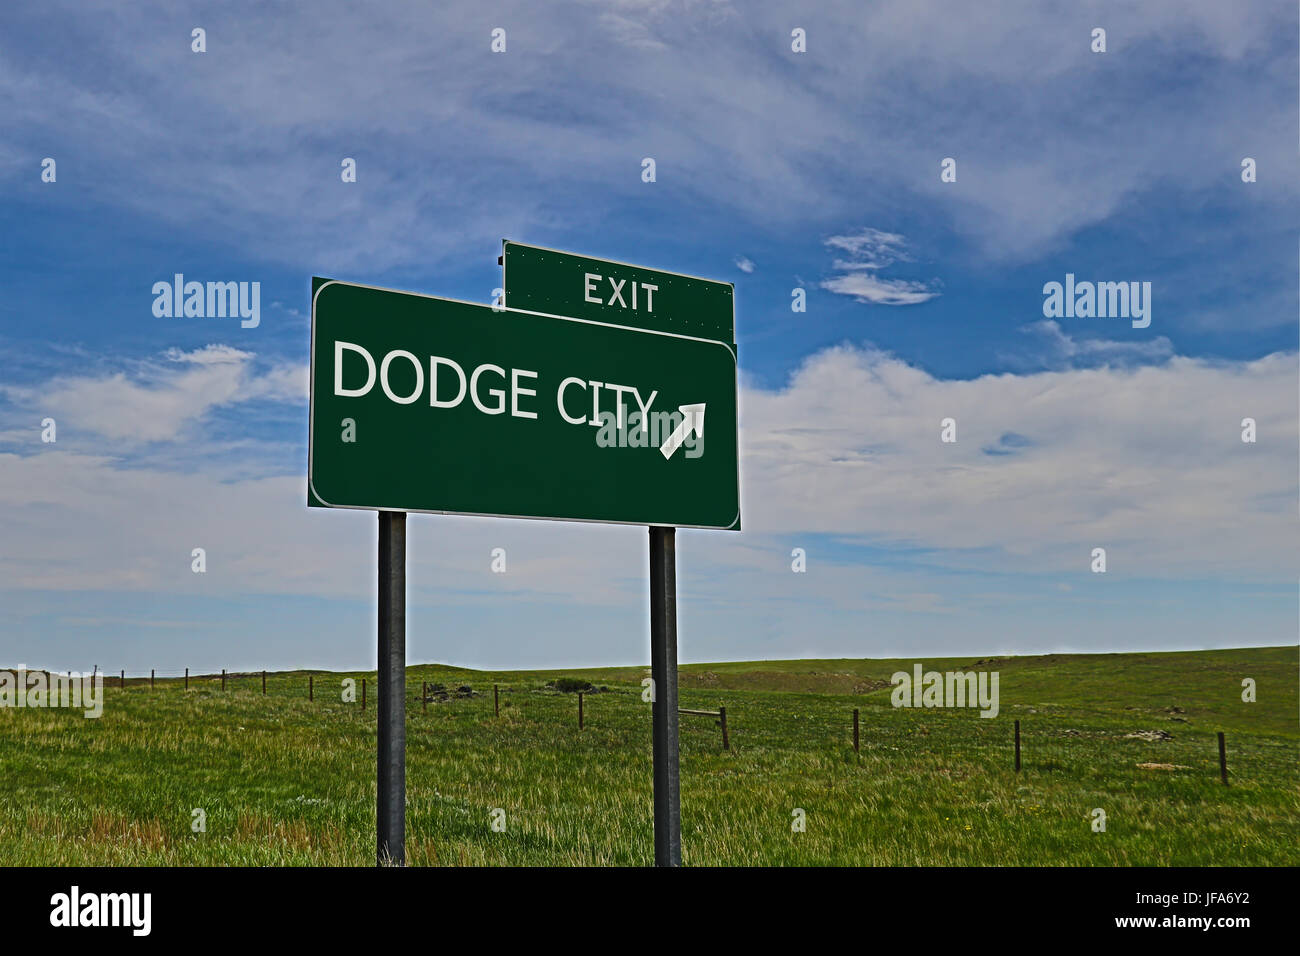 US Highway Exit Sign for Dodge City Stock Photo